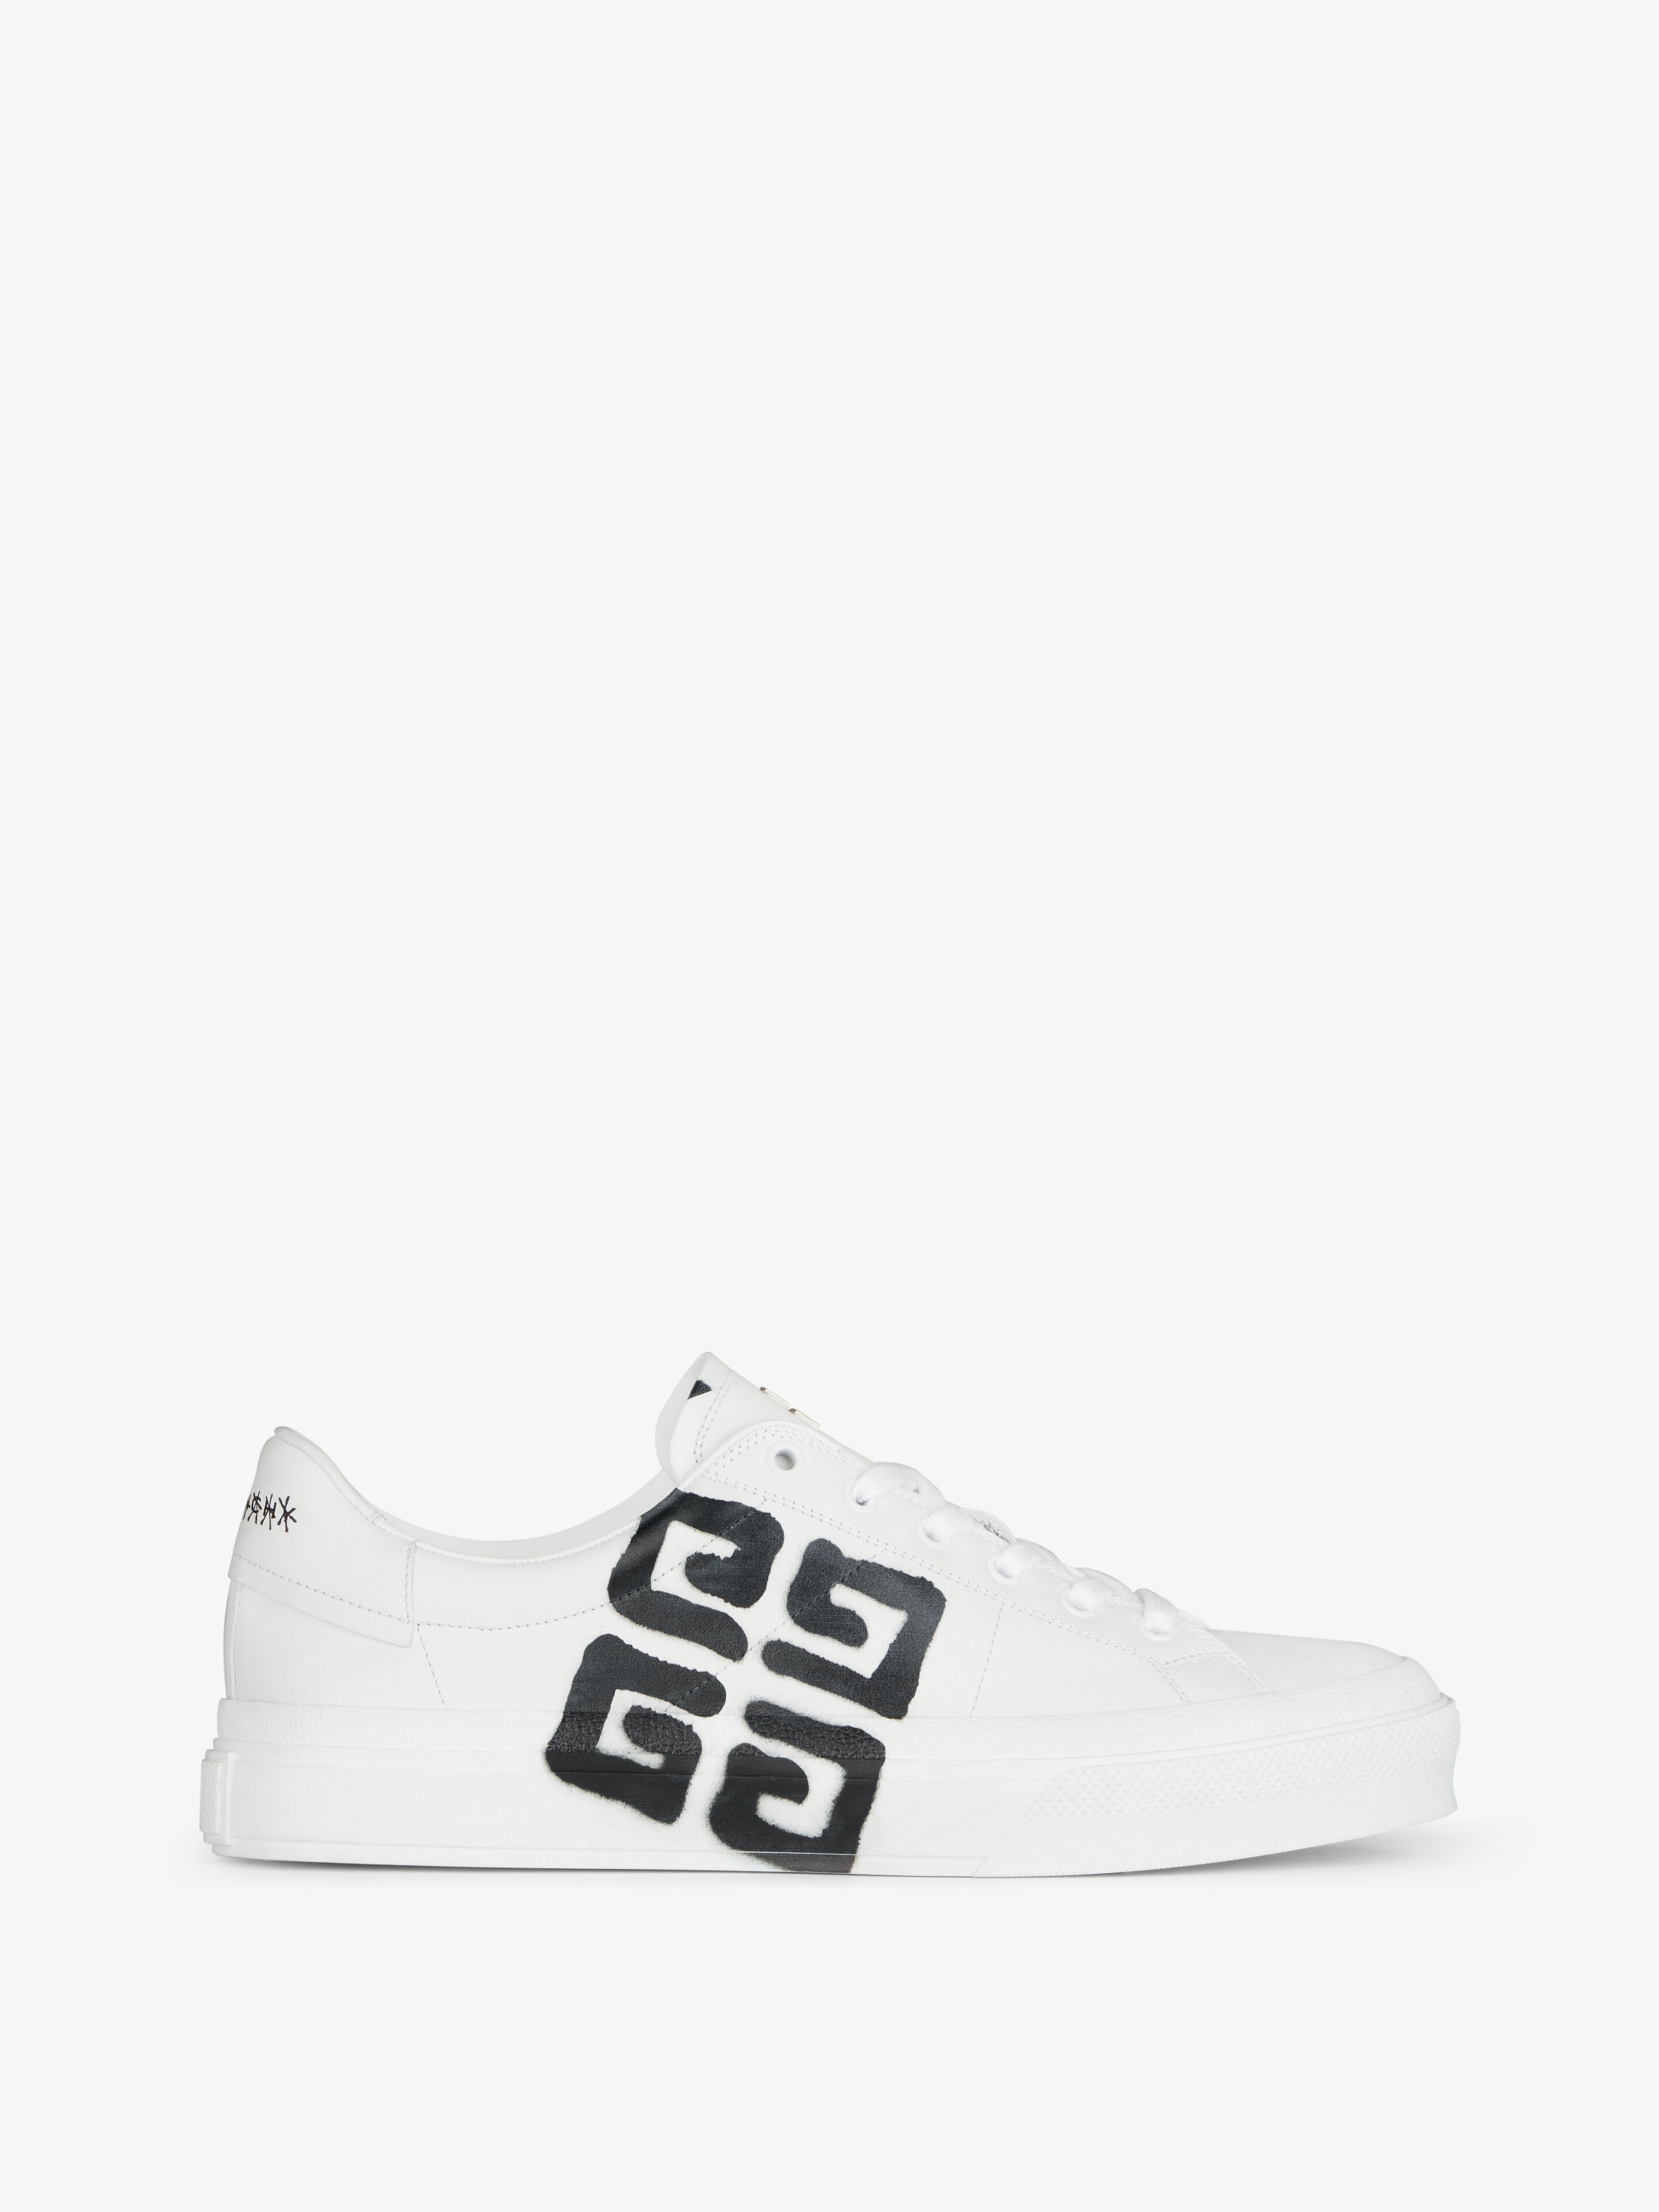 Sneakers City sport in leather with tag effect 4G print